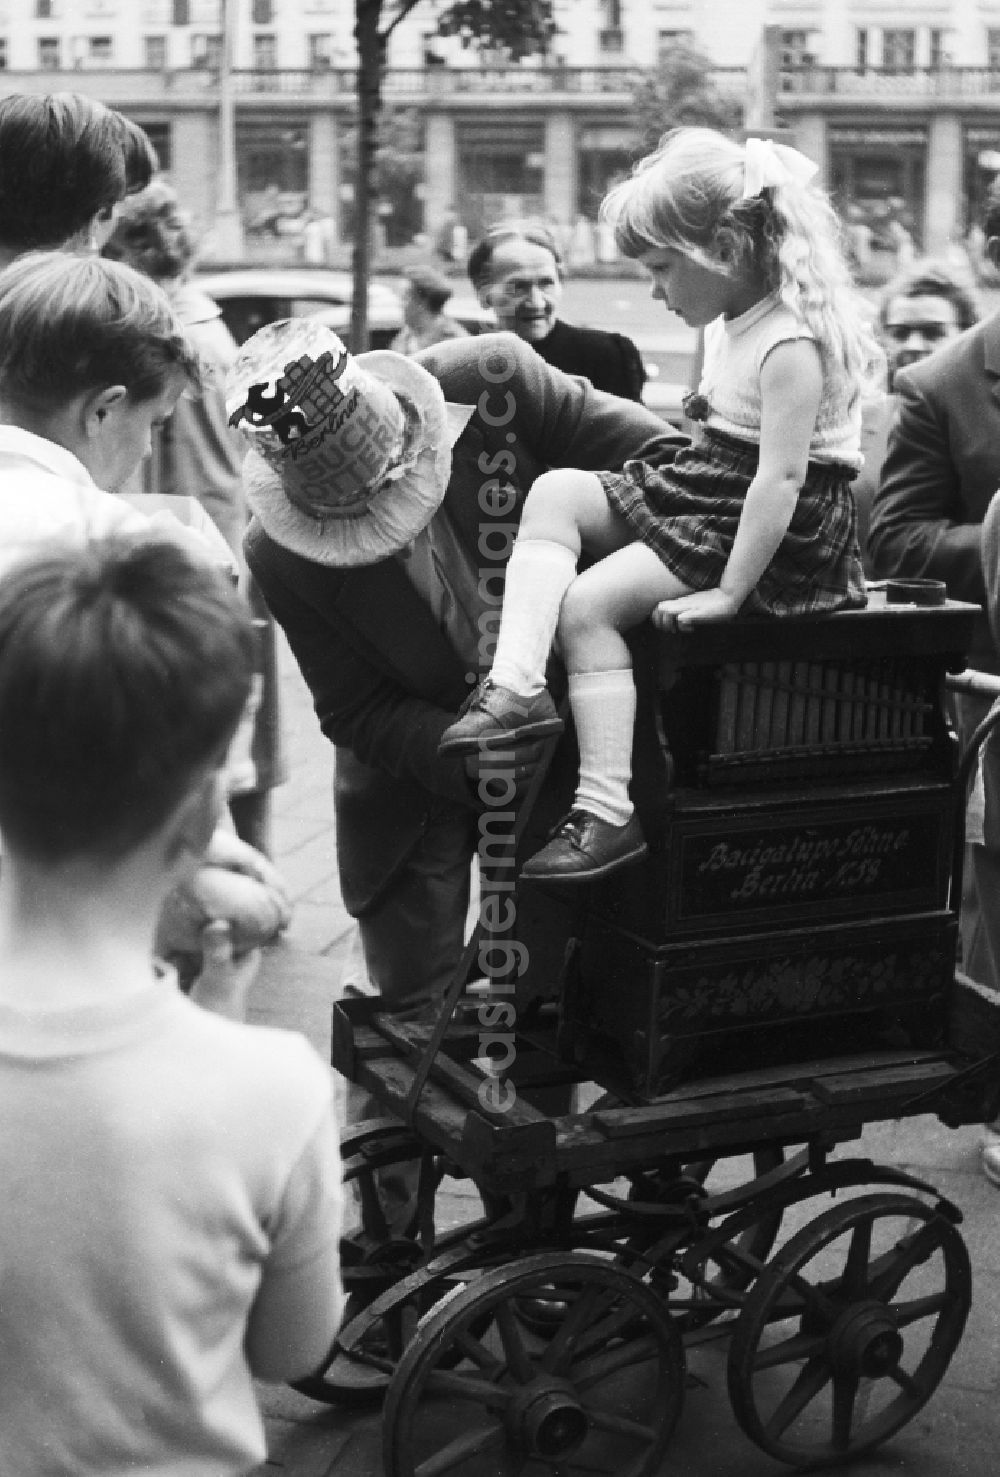 GDR image archive: Berlin - A small girl with plait sit on a barrel organ in Berlin, the former capital of the GDR, German democratic republic